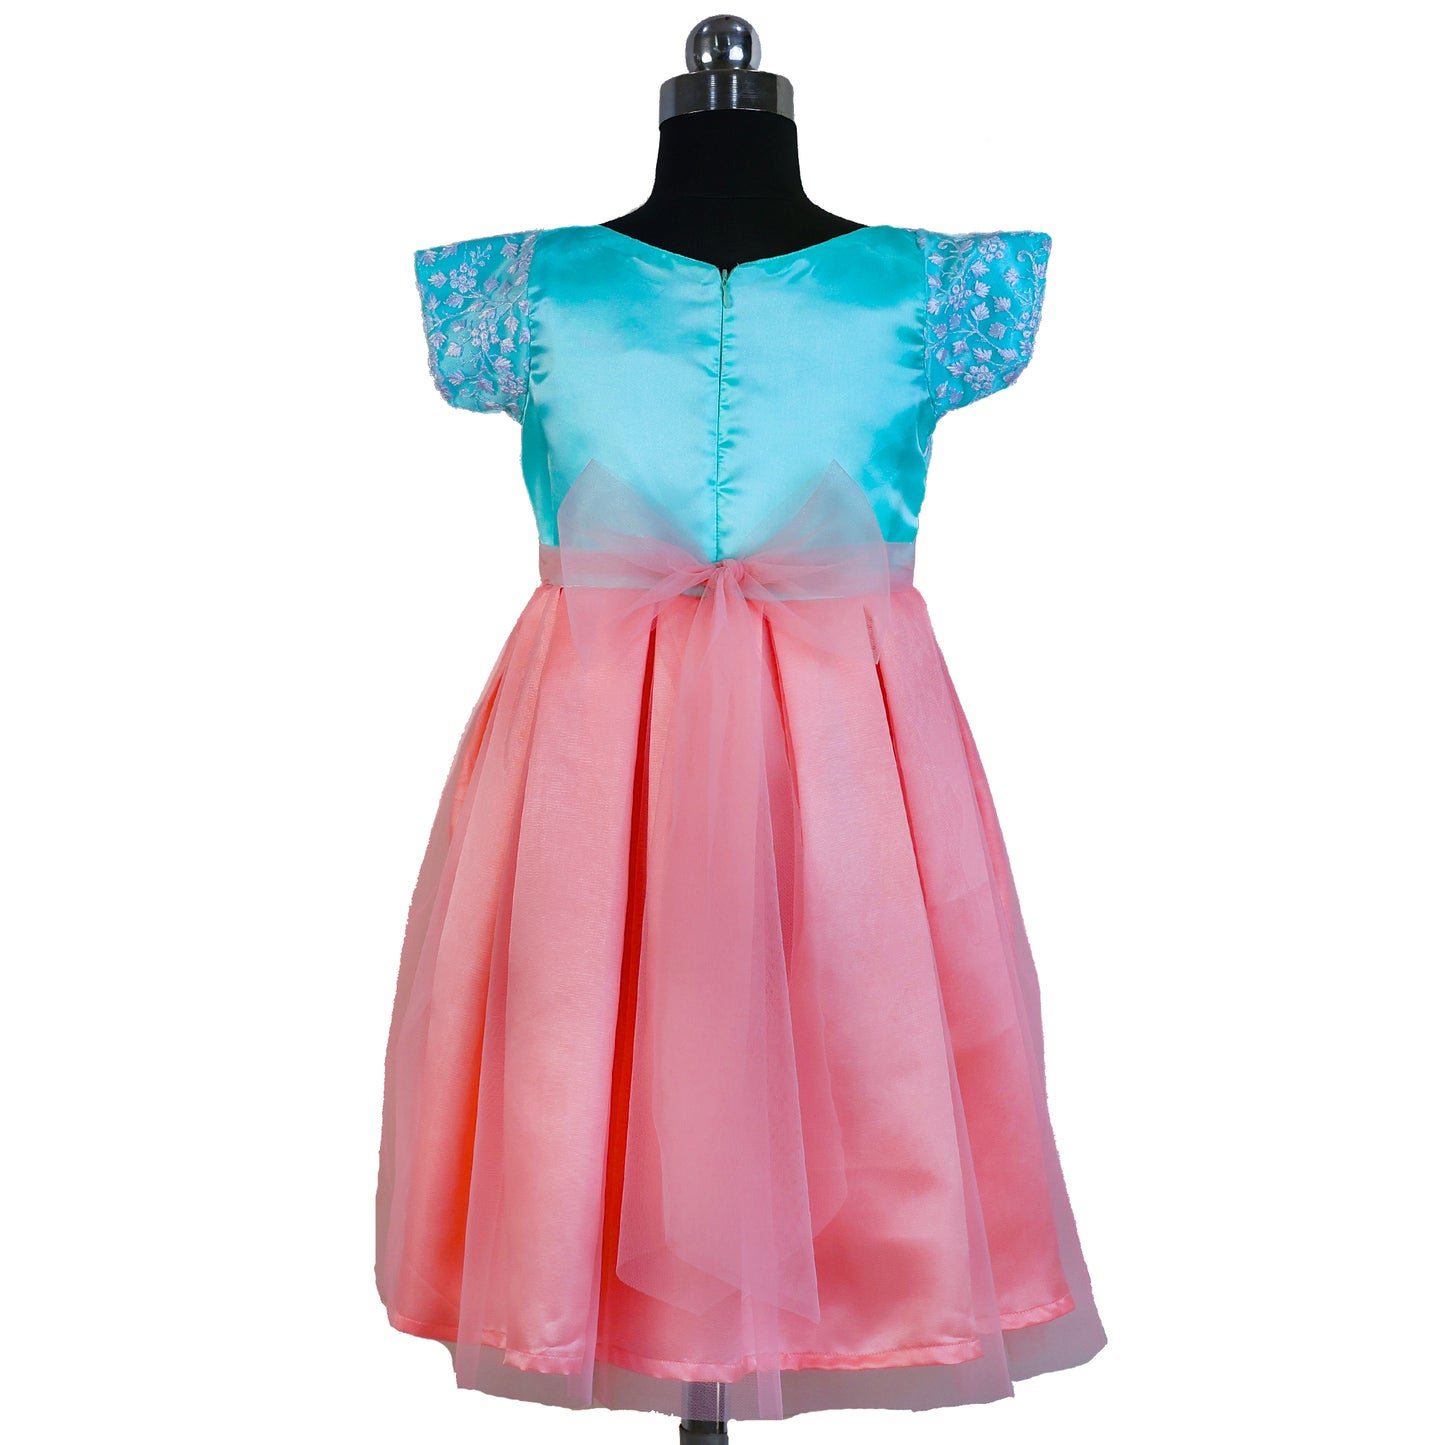 HEYKIDOO Floral Embroidered Box Pleated Girls Party Dress - Peach & Blue